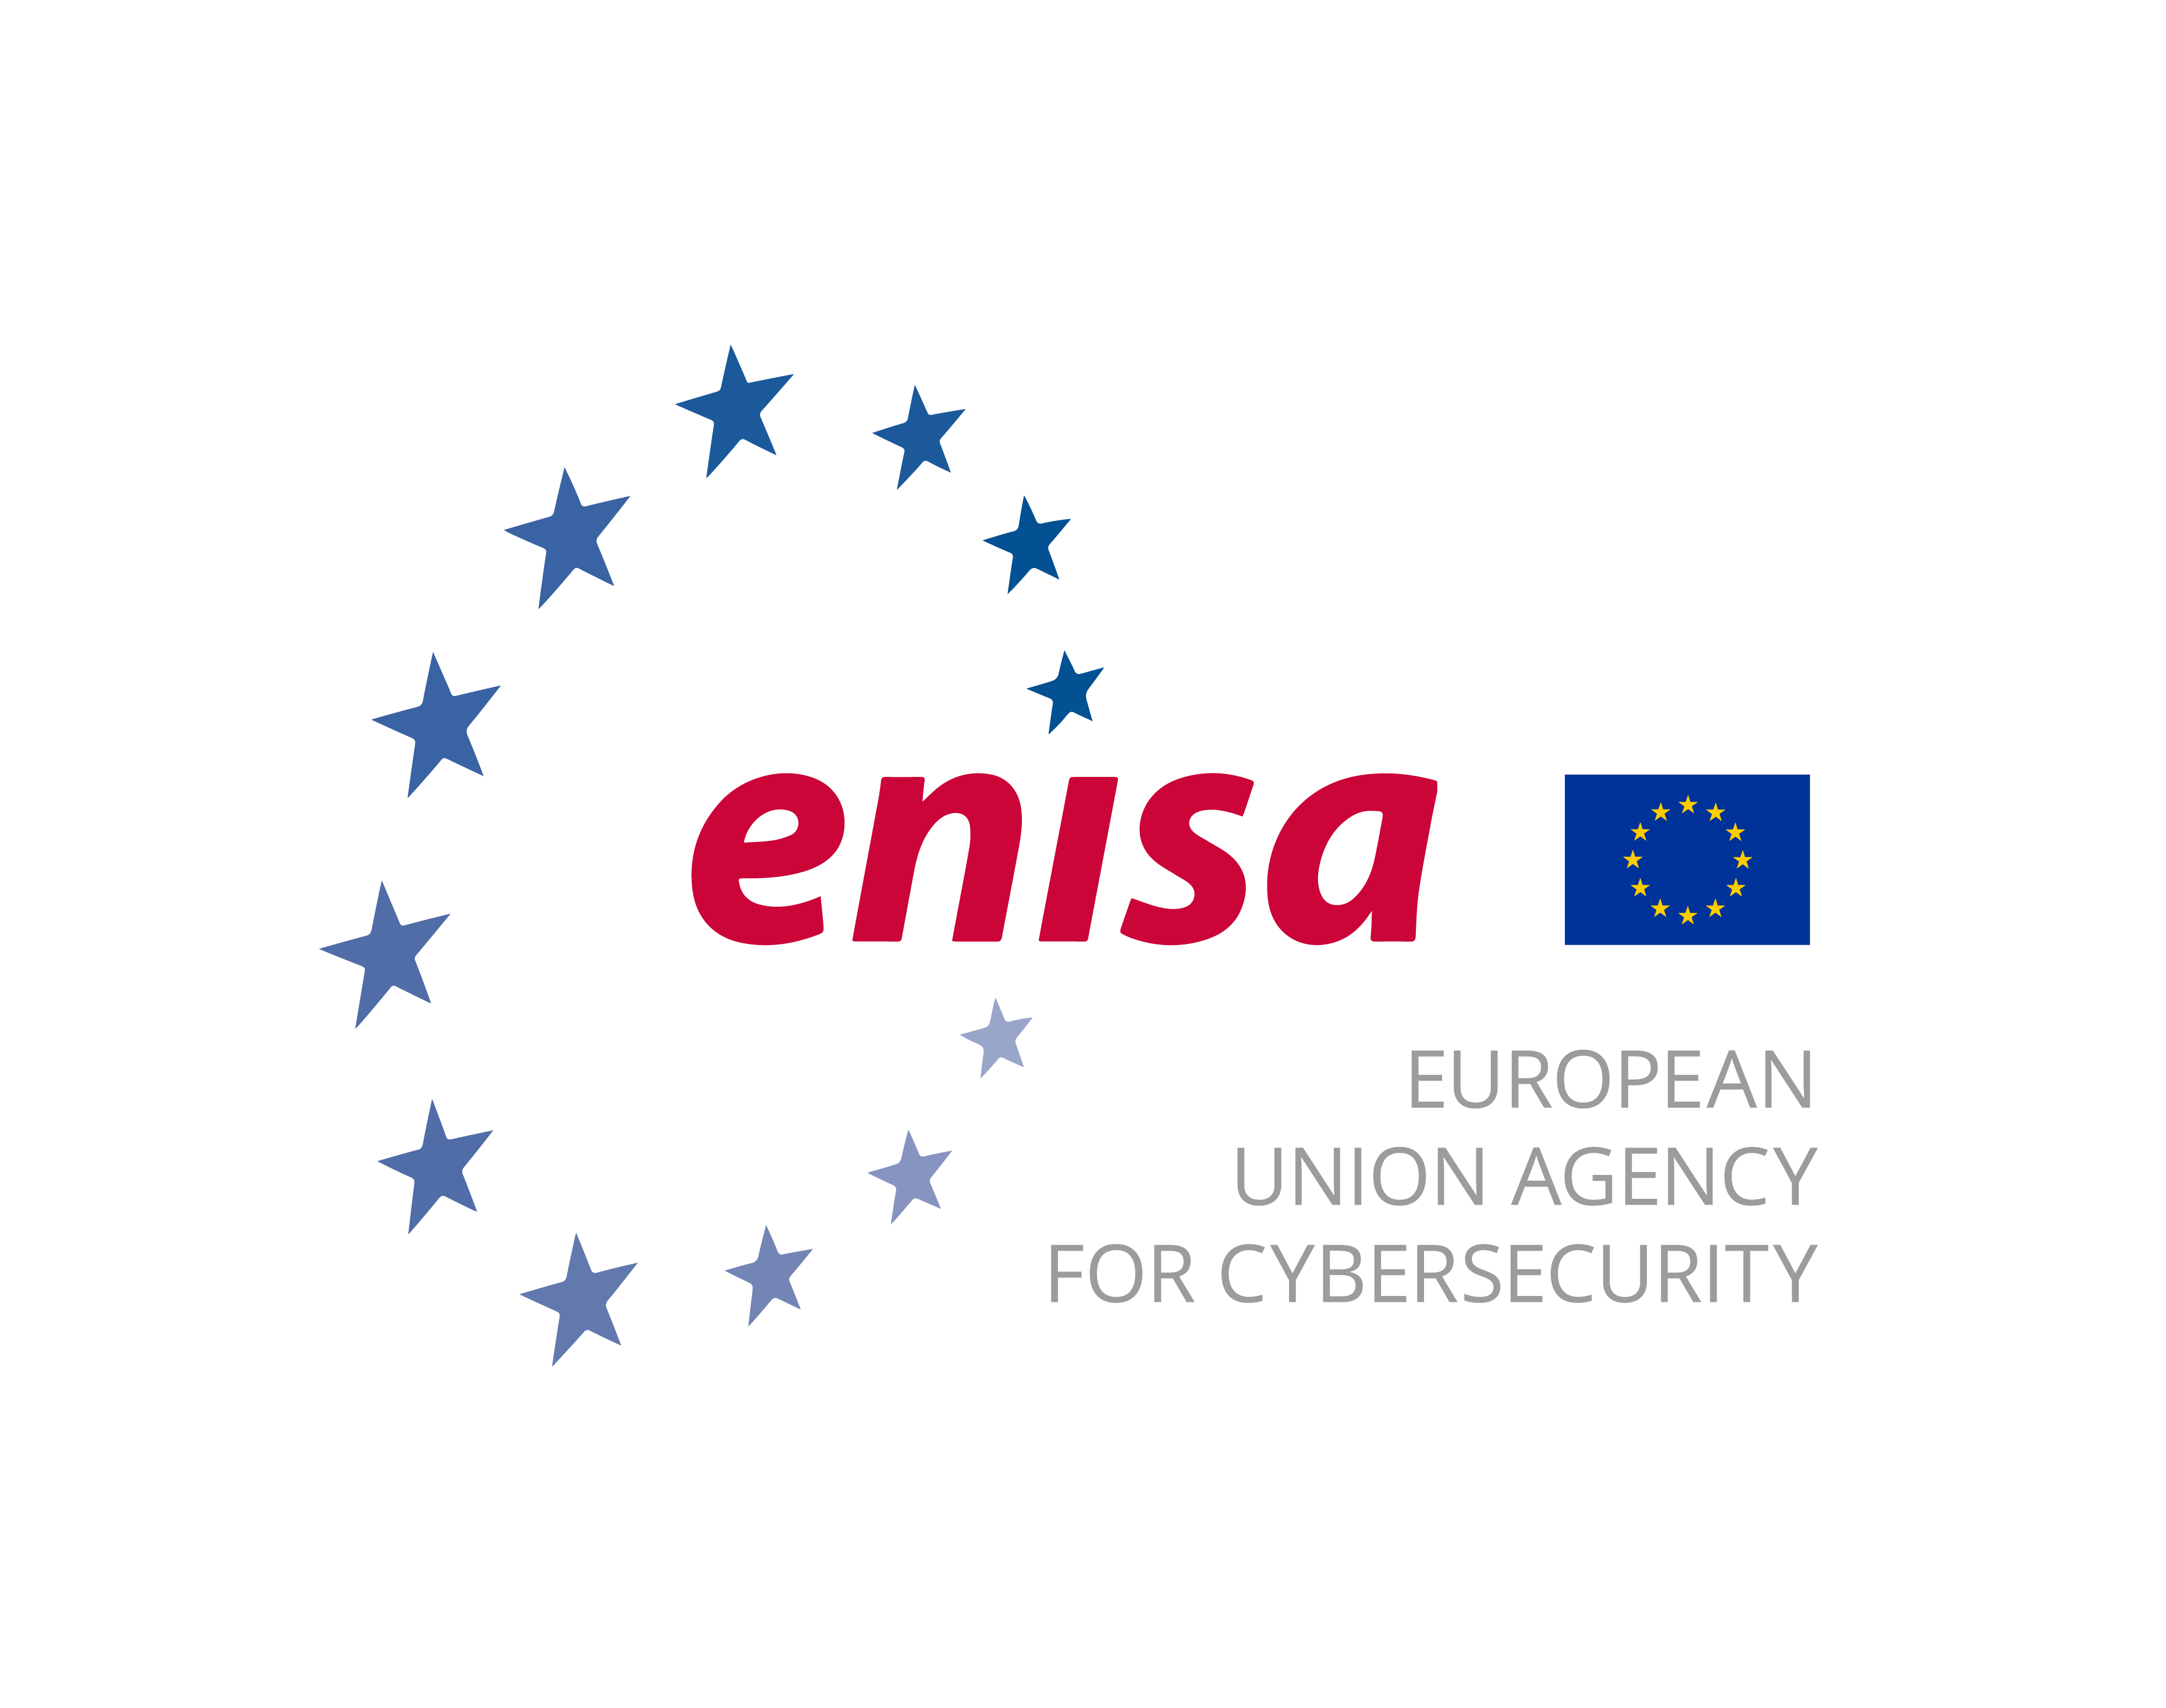 Full ENISA logo with name